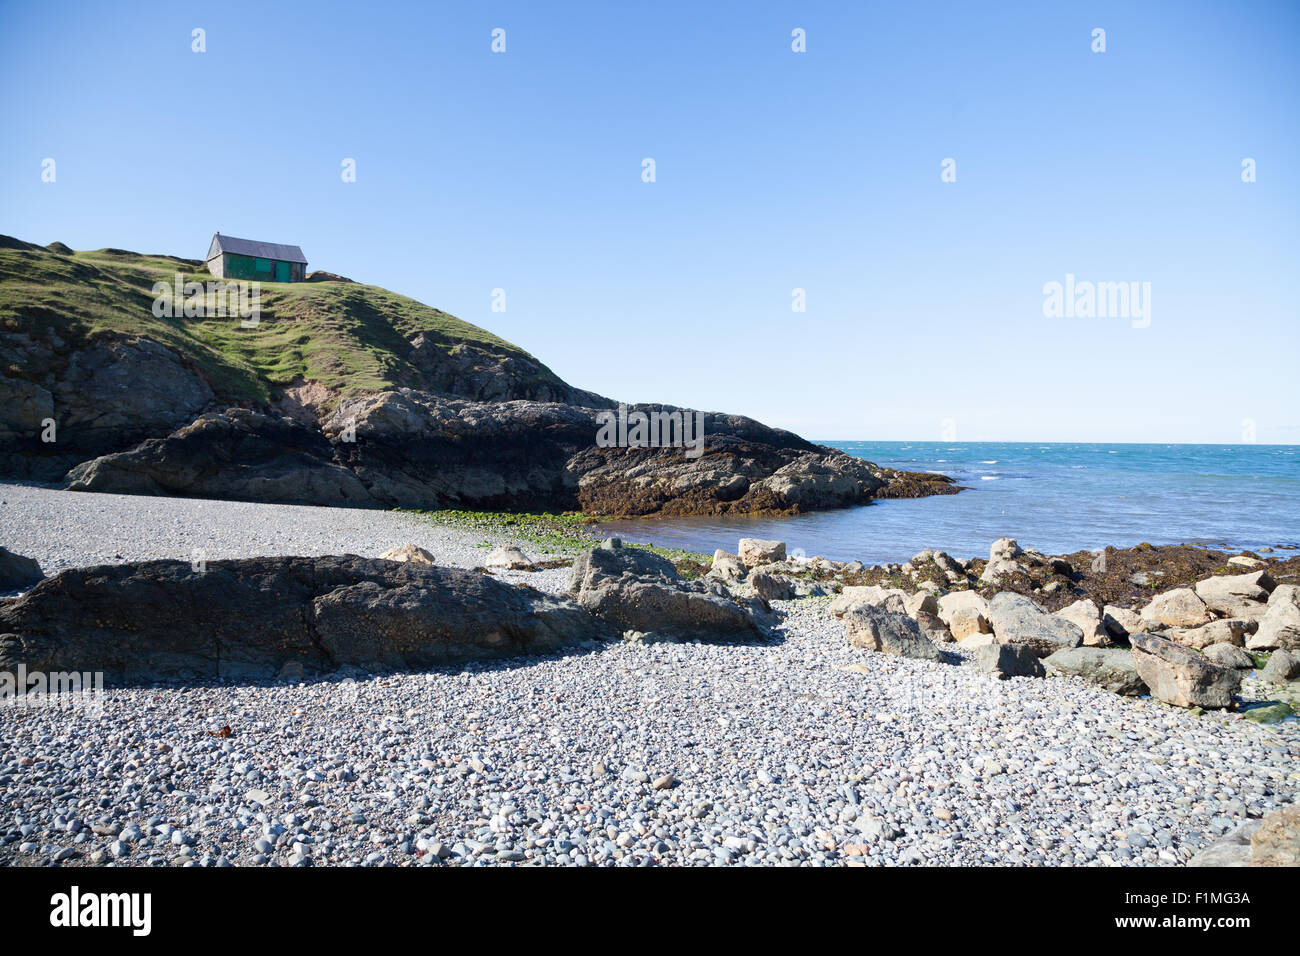 A view across pebble beach at Porth Ysgaden, Tudweiliog, Llyn Peninsula, North Wales with abandoned fishing hut on clifftop Stock Photo